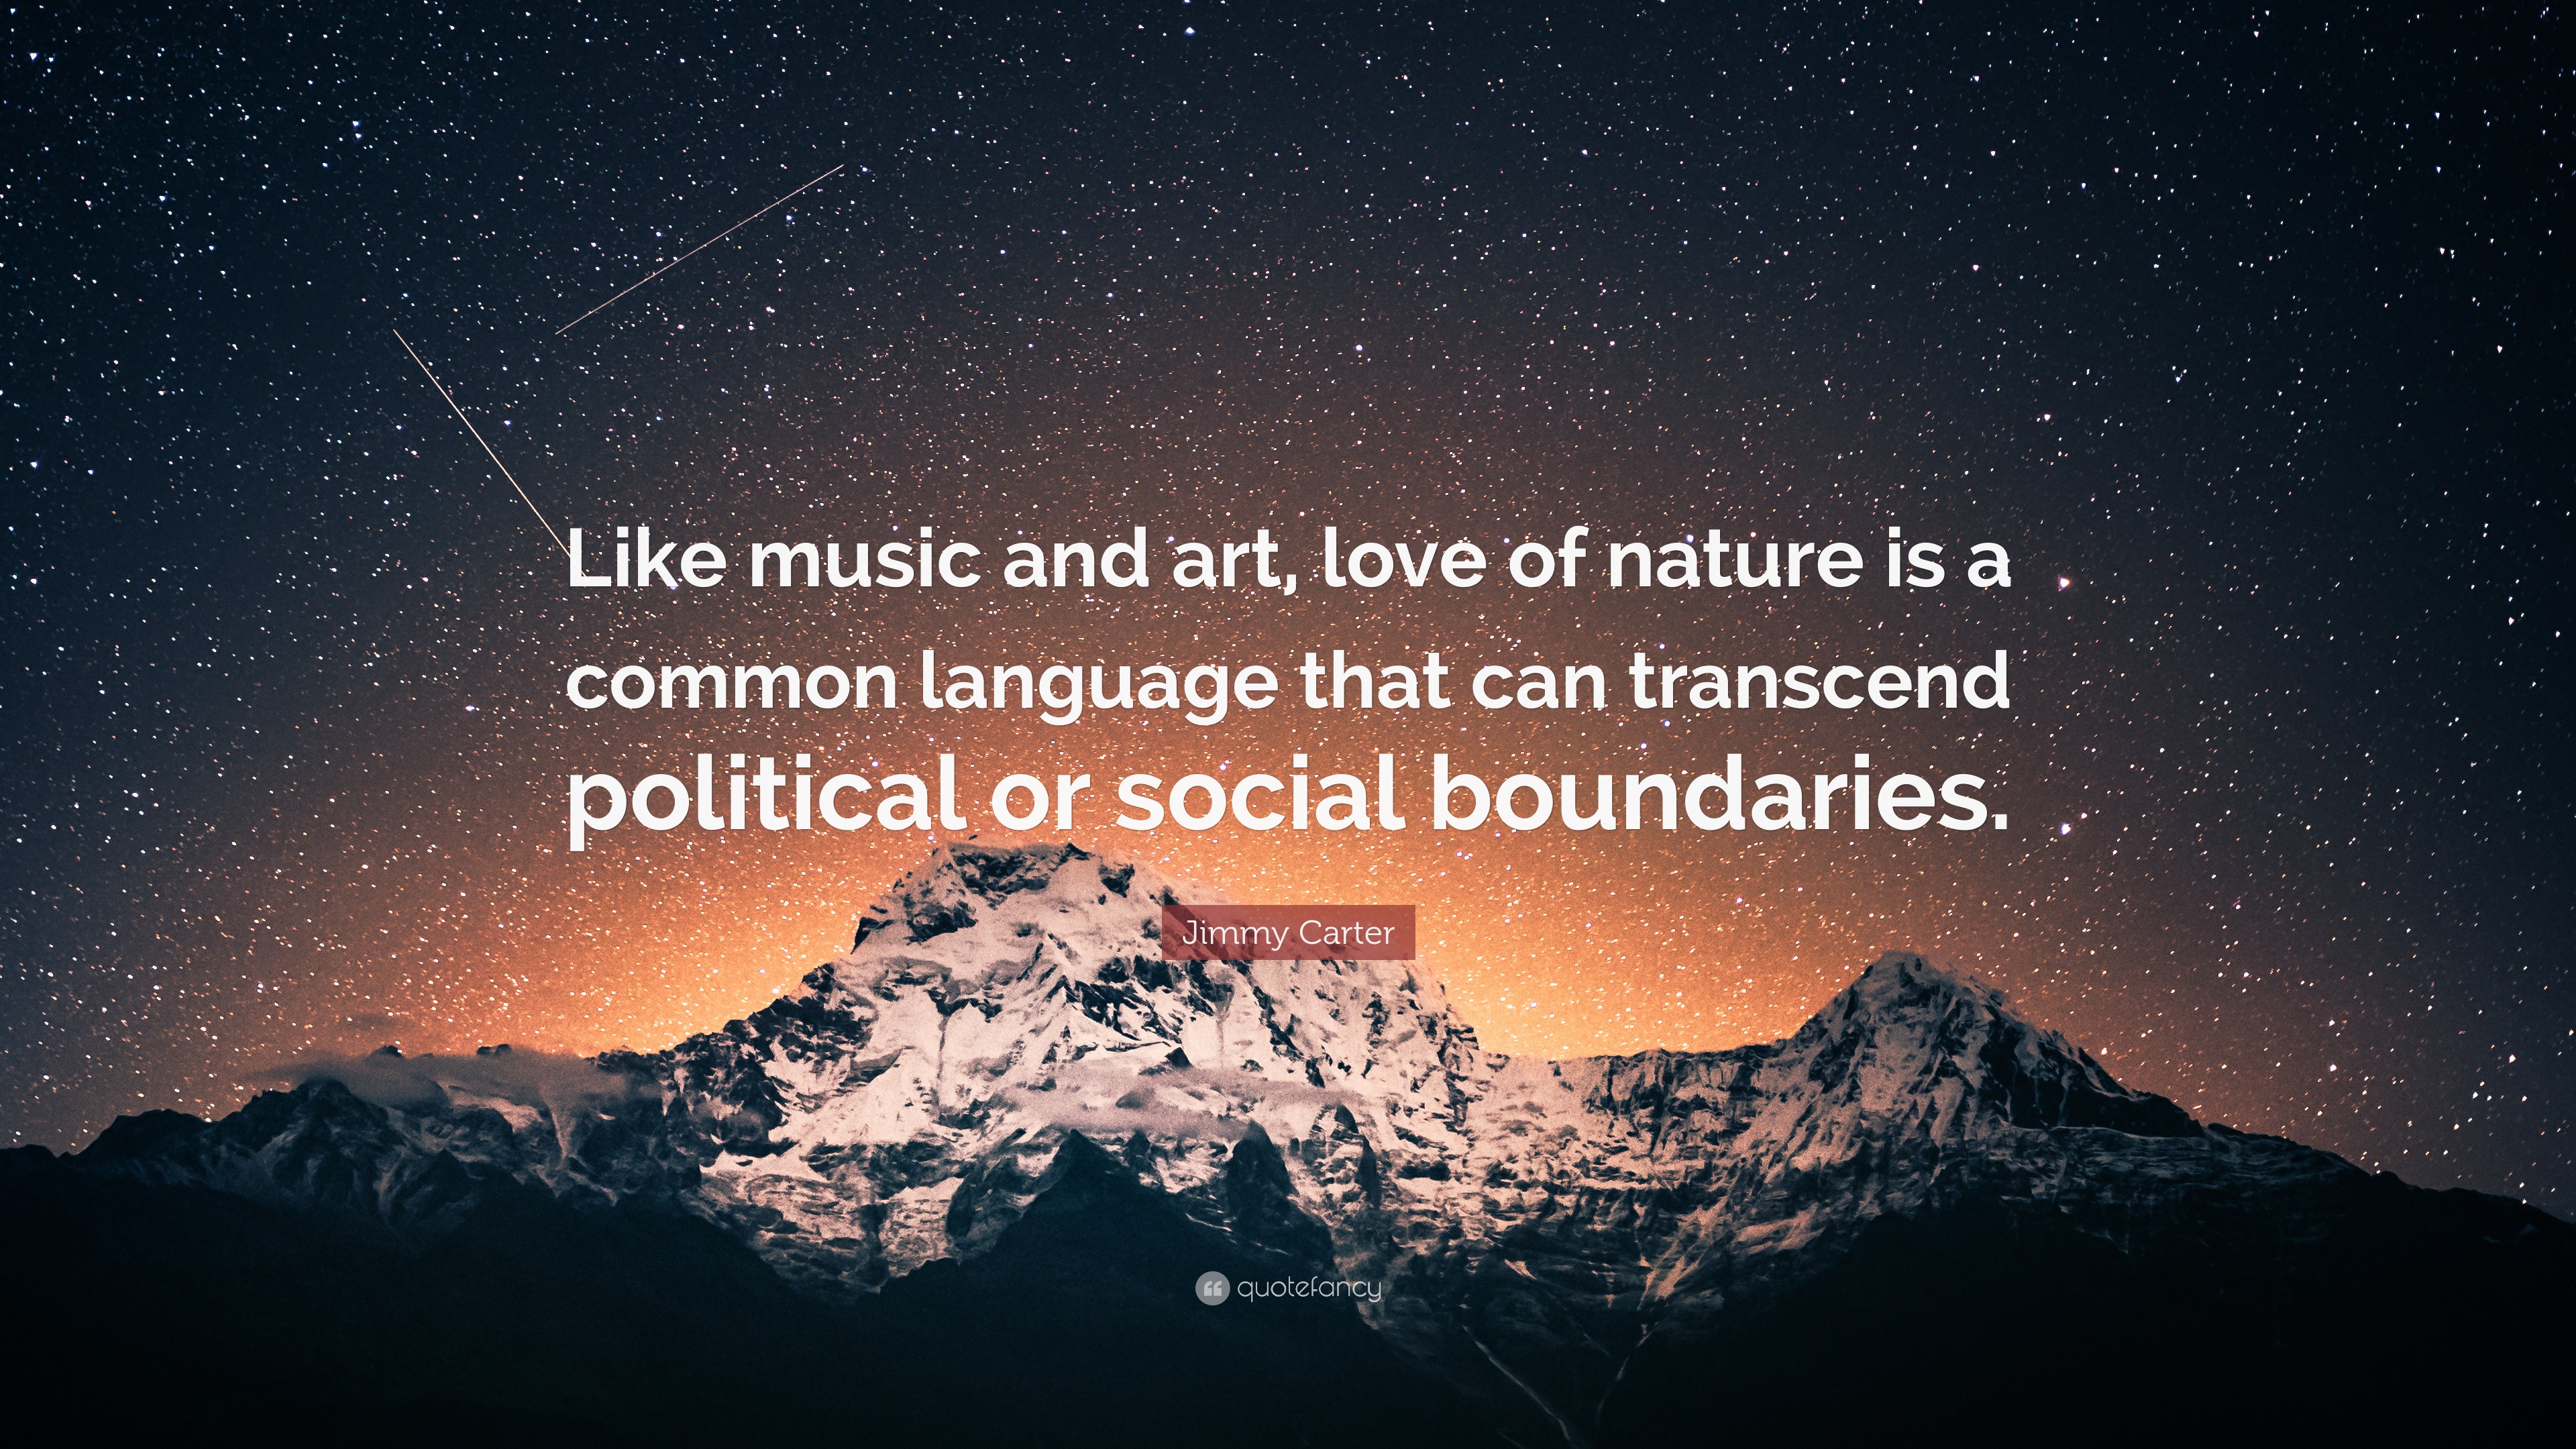 https://quotefancy.com/media/wallpaper/3840x2160/2524964-Jimmy-Carter-Quote-Like-music-and-art-love-of-nature-is-a-common.jpg